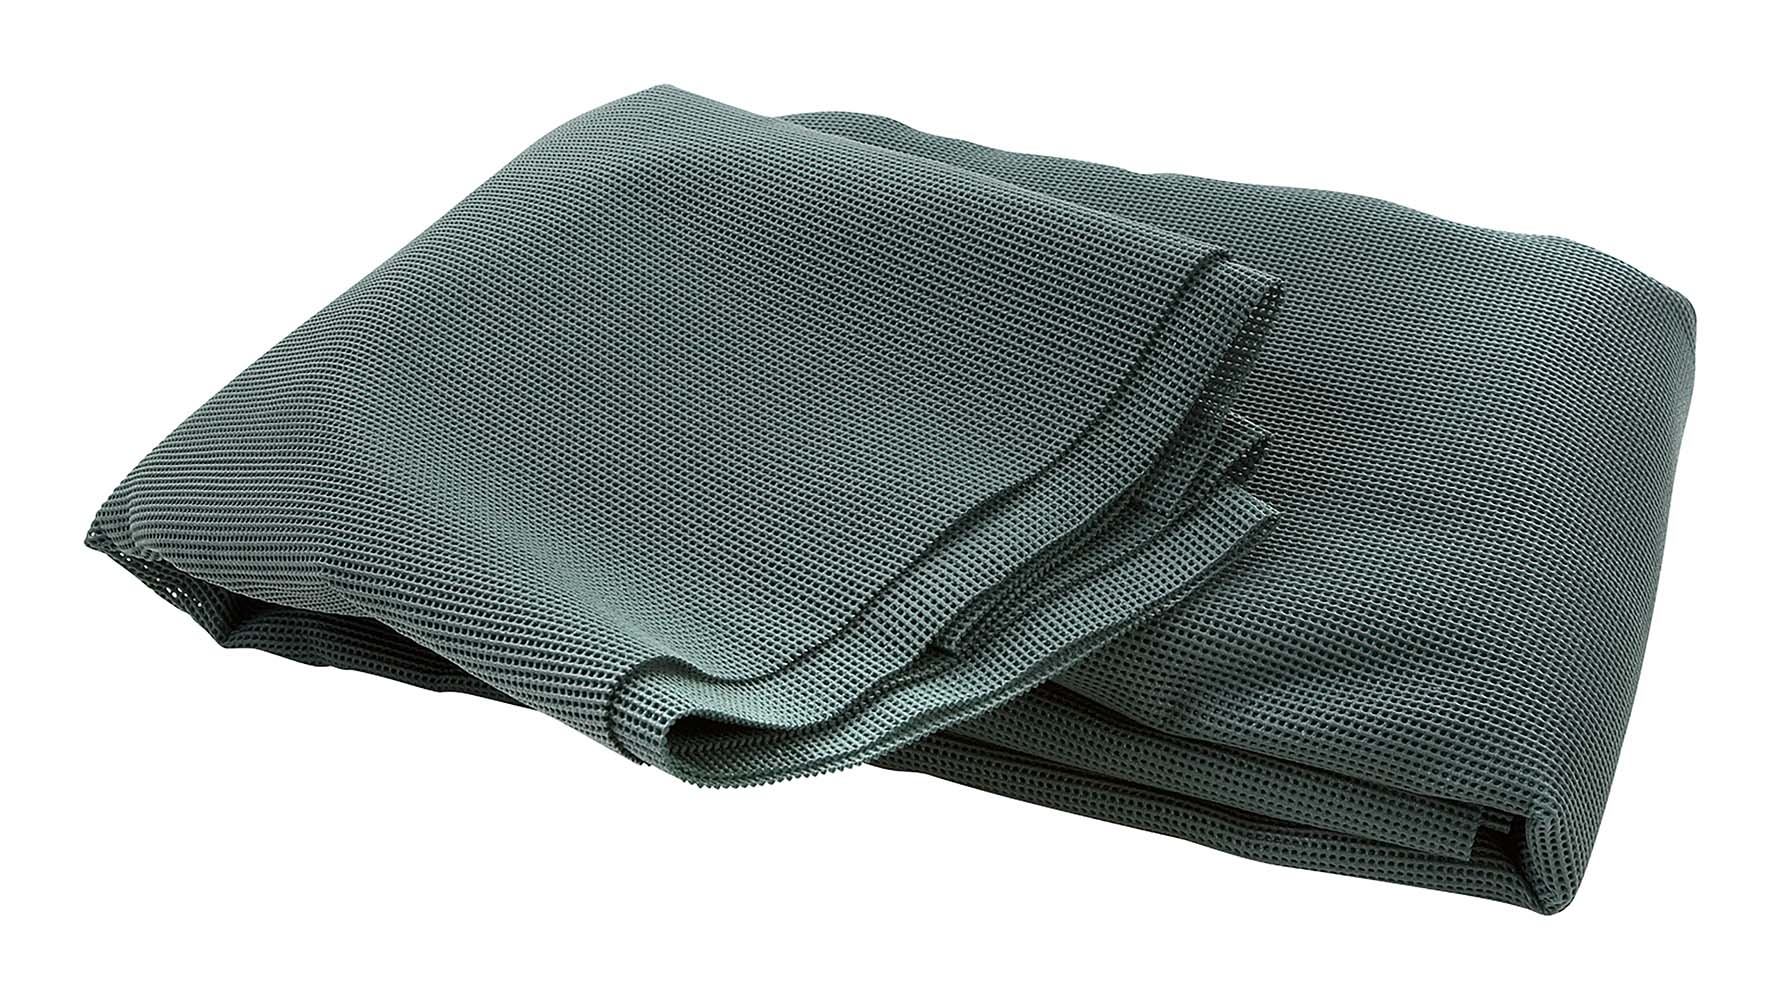 4218011 Extra sturdy tent carpet. This carpet is very solid, rot proof, durable, supple, elastic, washable at 30 degrees and light weight. Stays in place due to the non-slip and saves grass through the open structure. With a polyester core with an extra heavy coating. Including a handy carry bag.